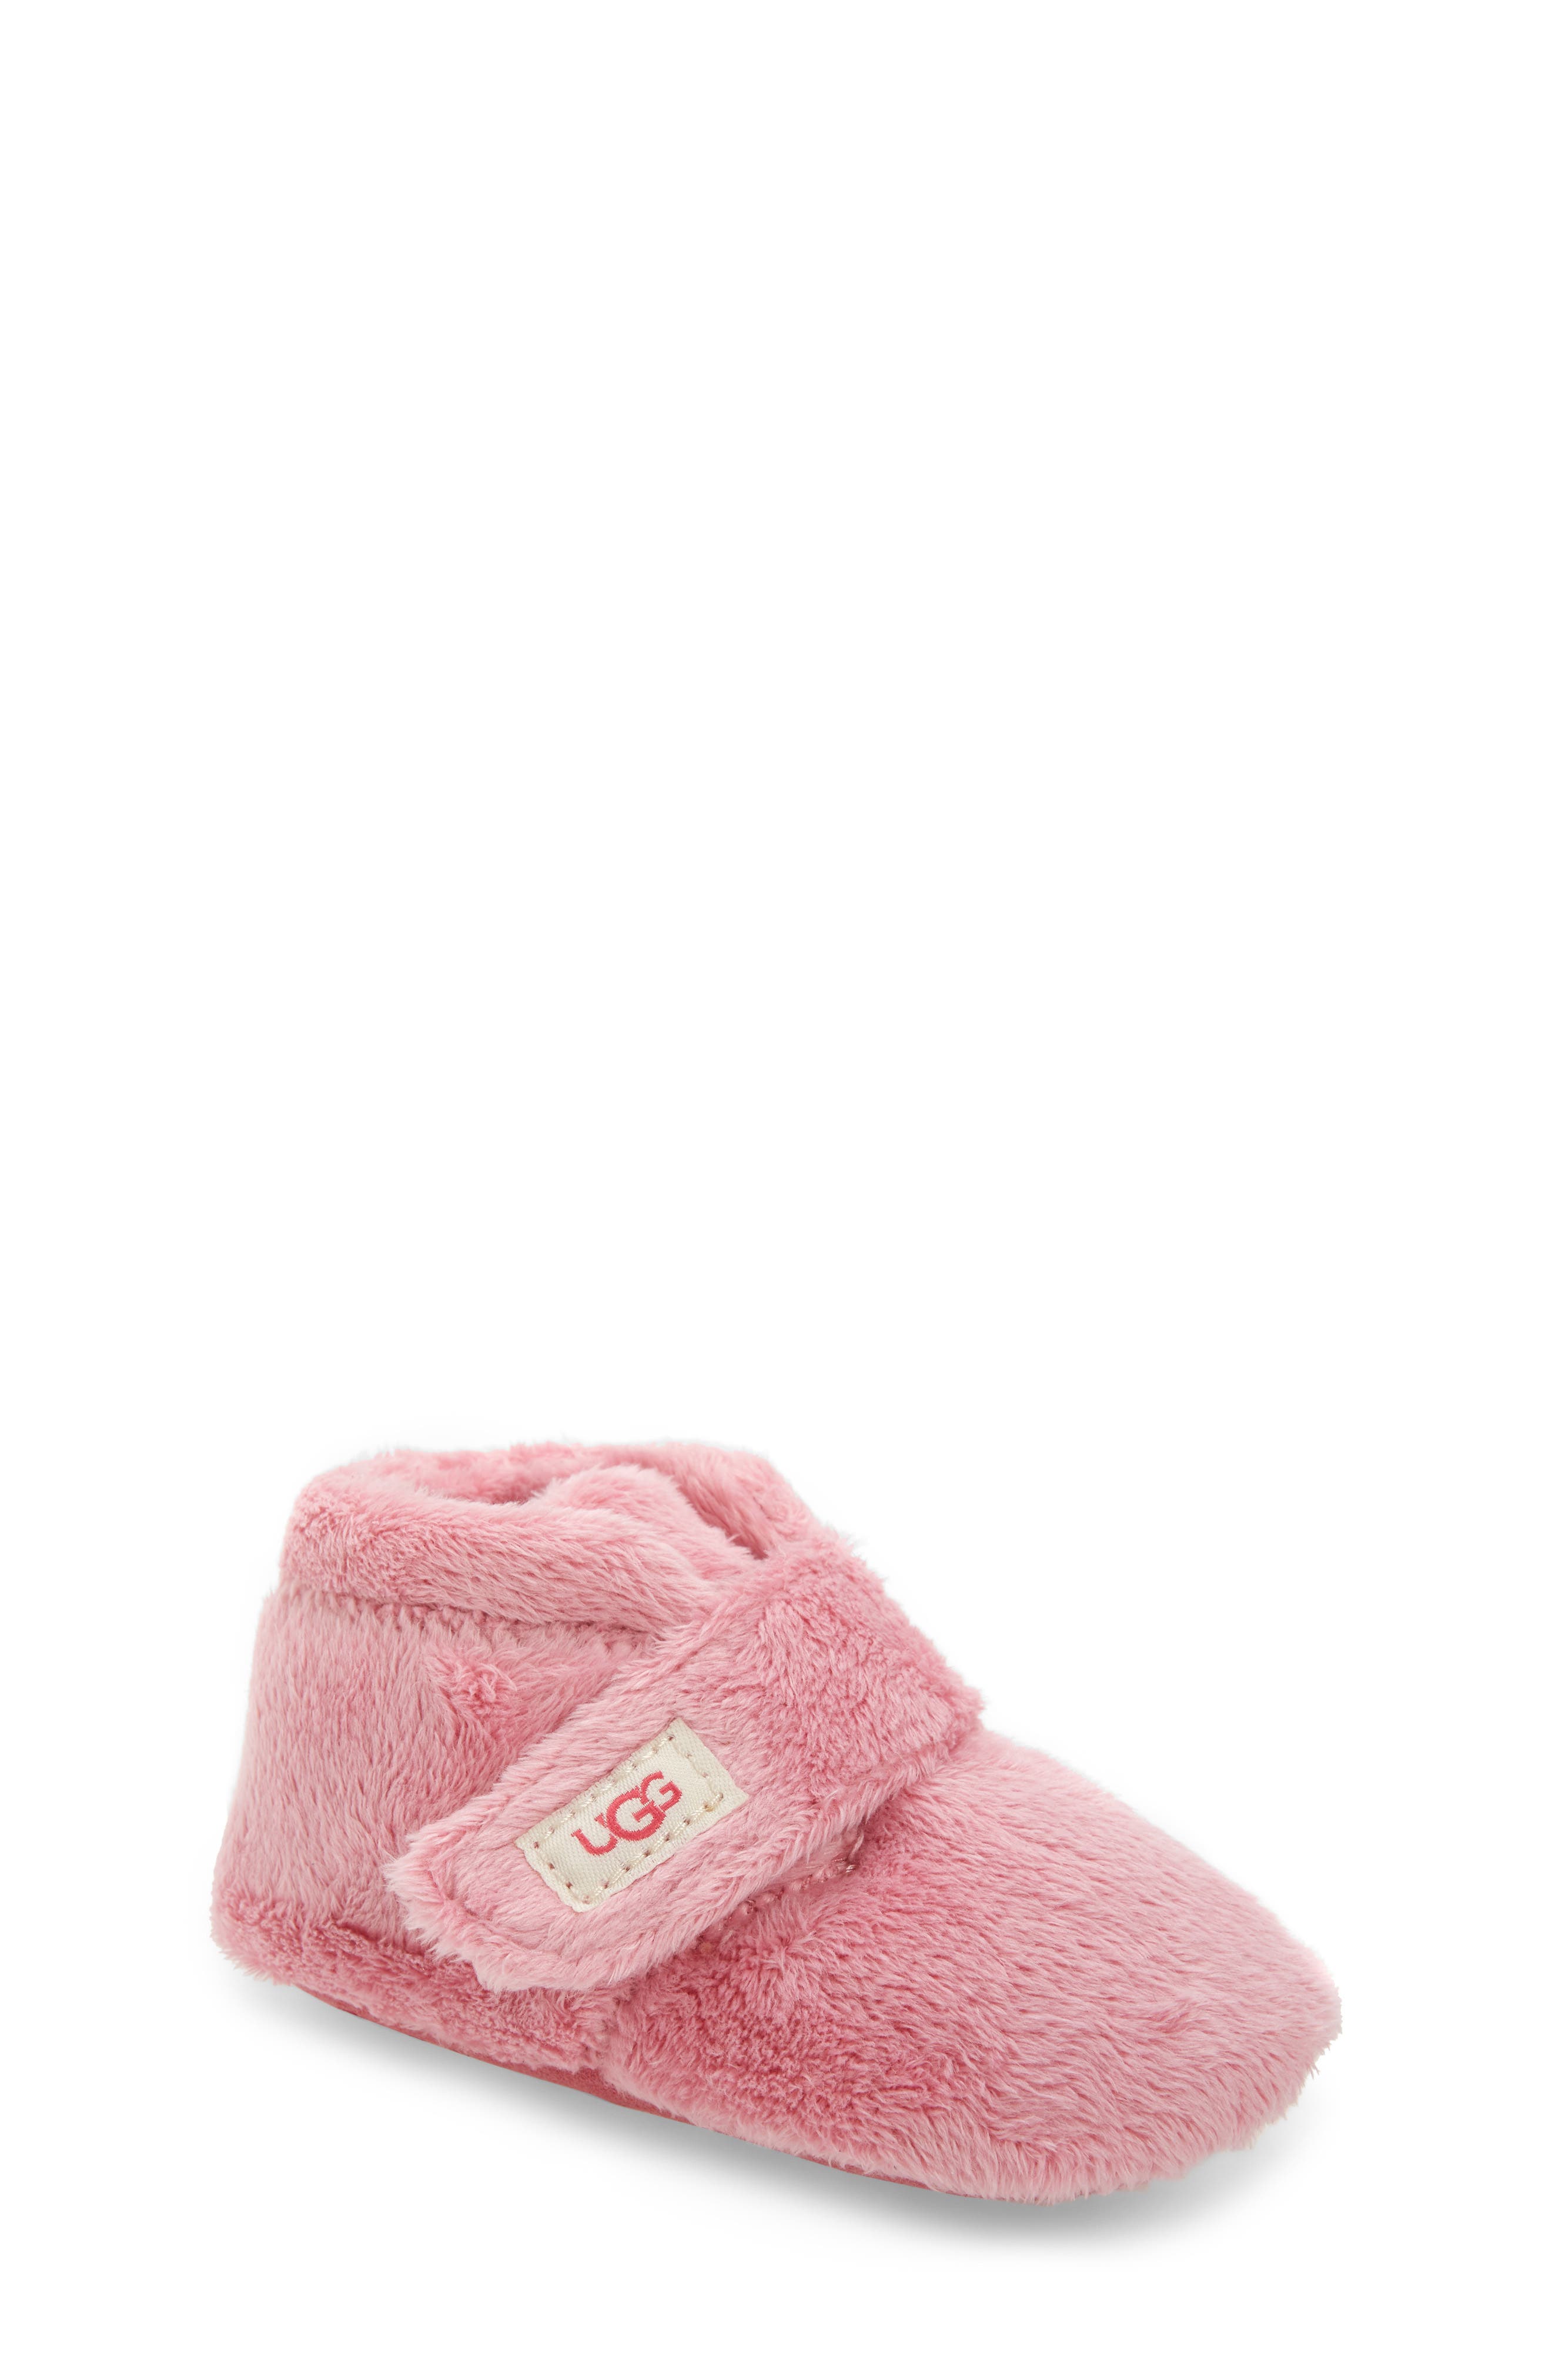 nordstrom baby ugg boots